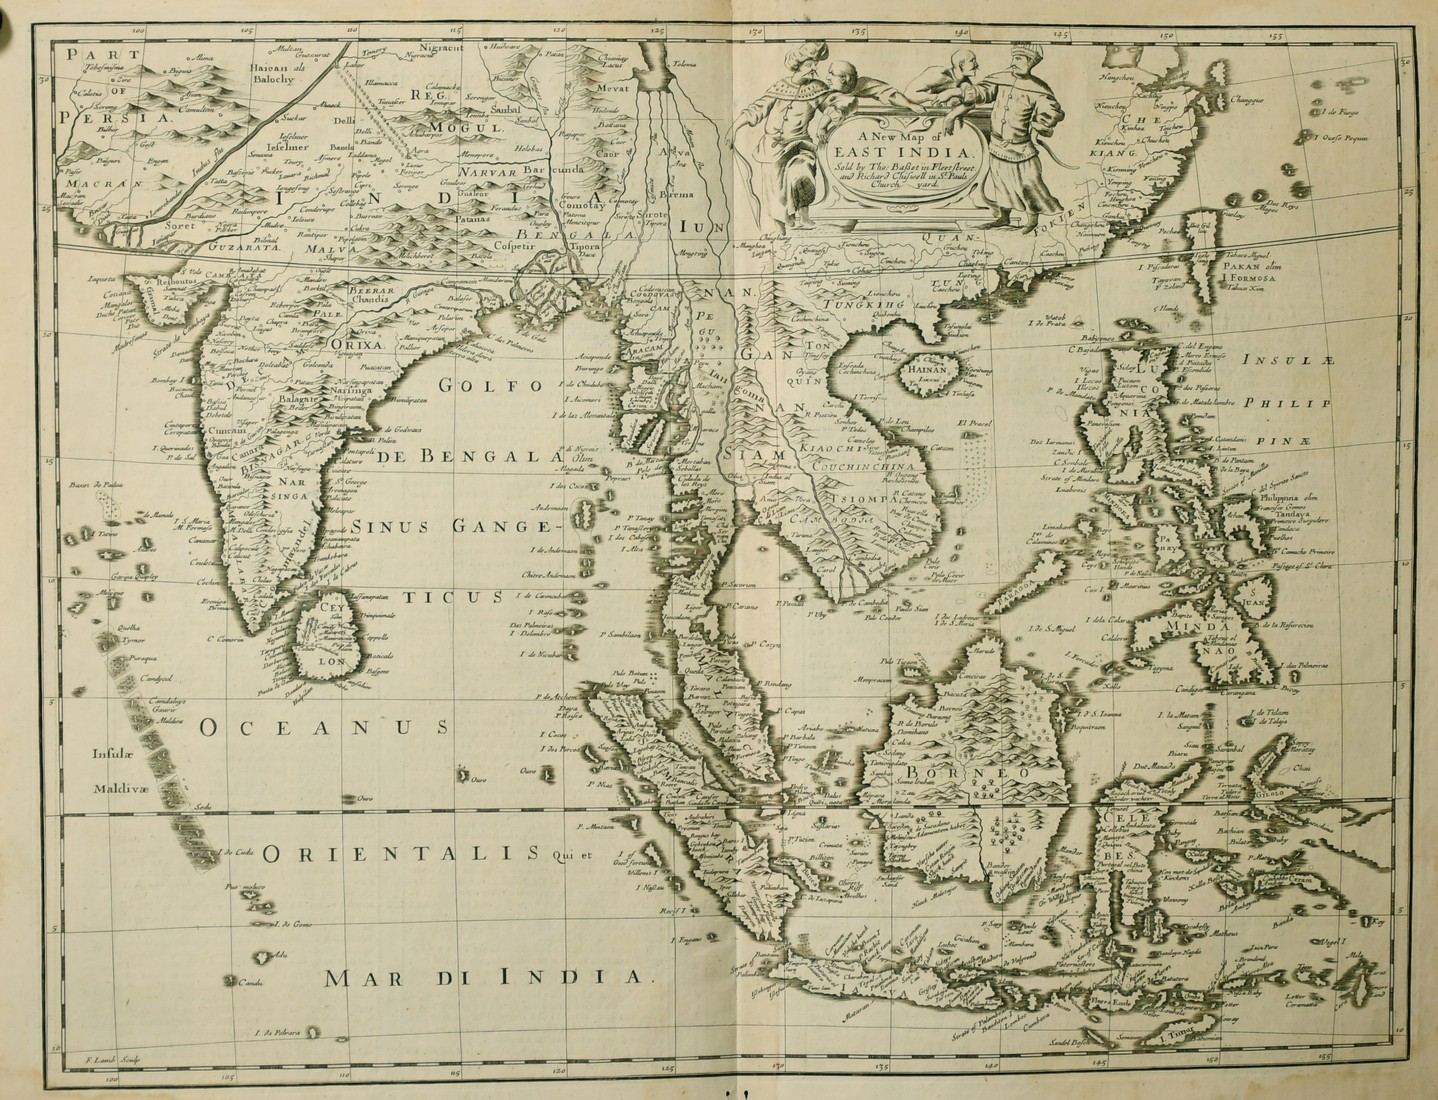 John Speed engraved by F. Lamb, 'A New Map of East India', 17th Century,17.5" x 22", (unframed).